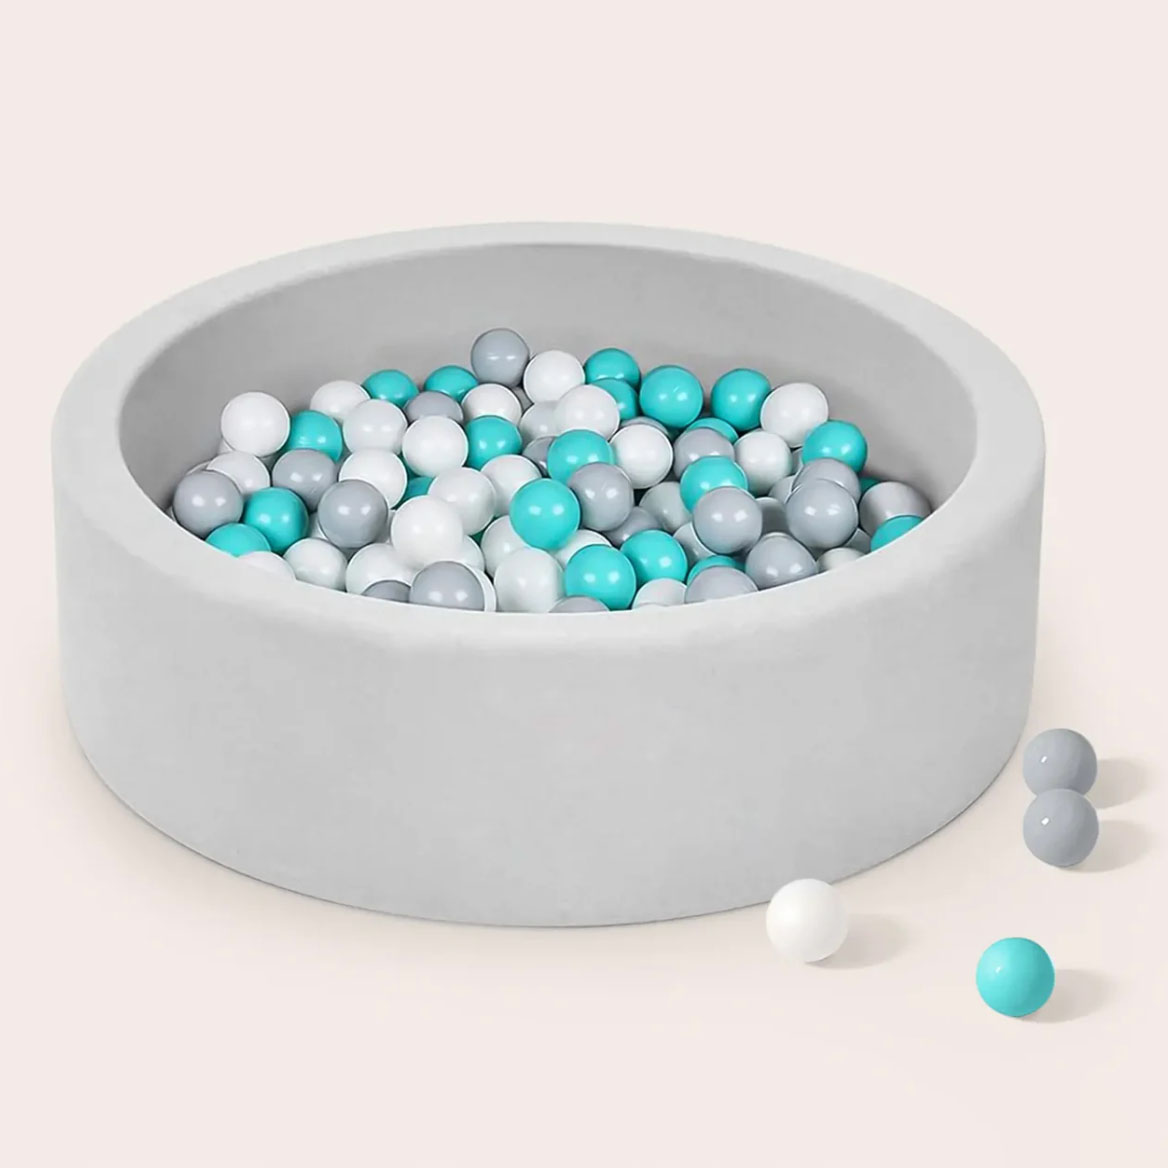 White, grey and blue balls in a pit pool